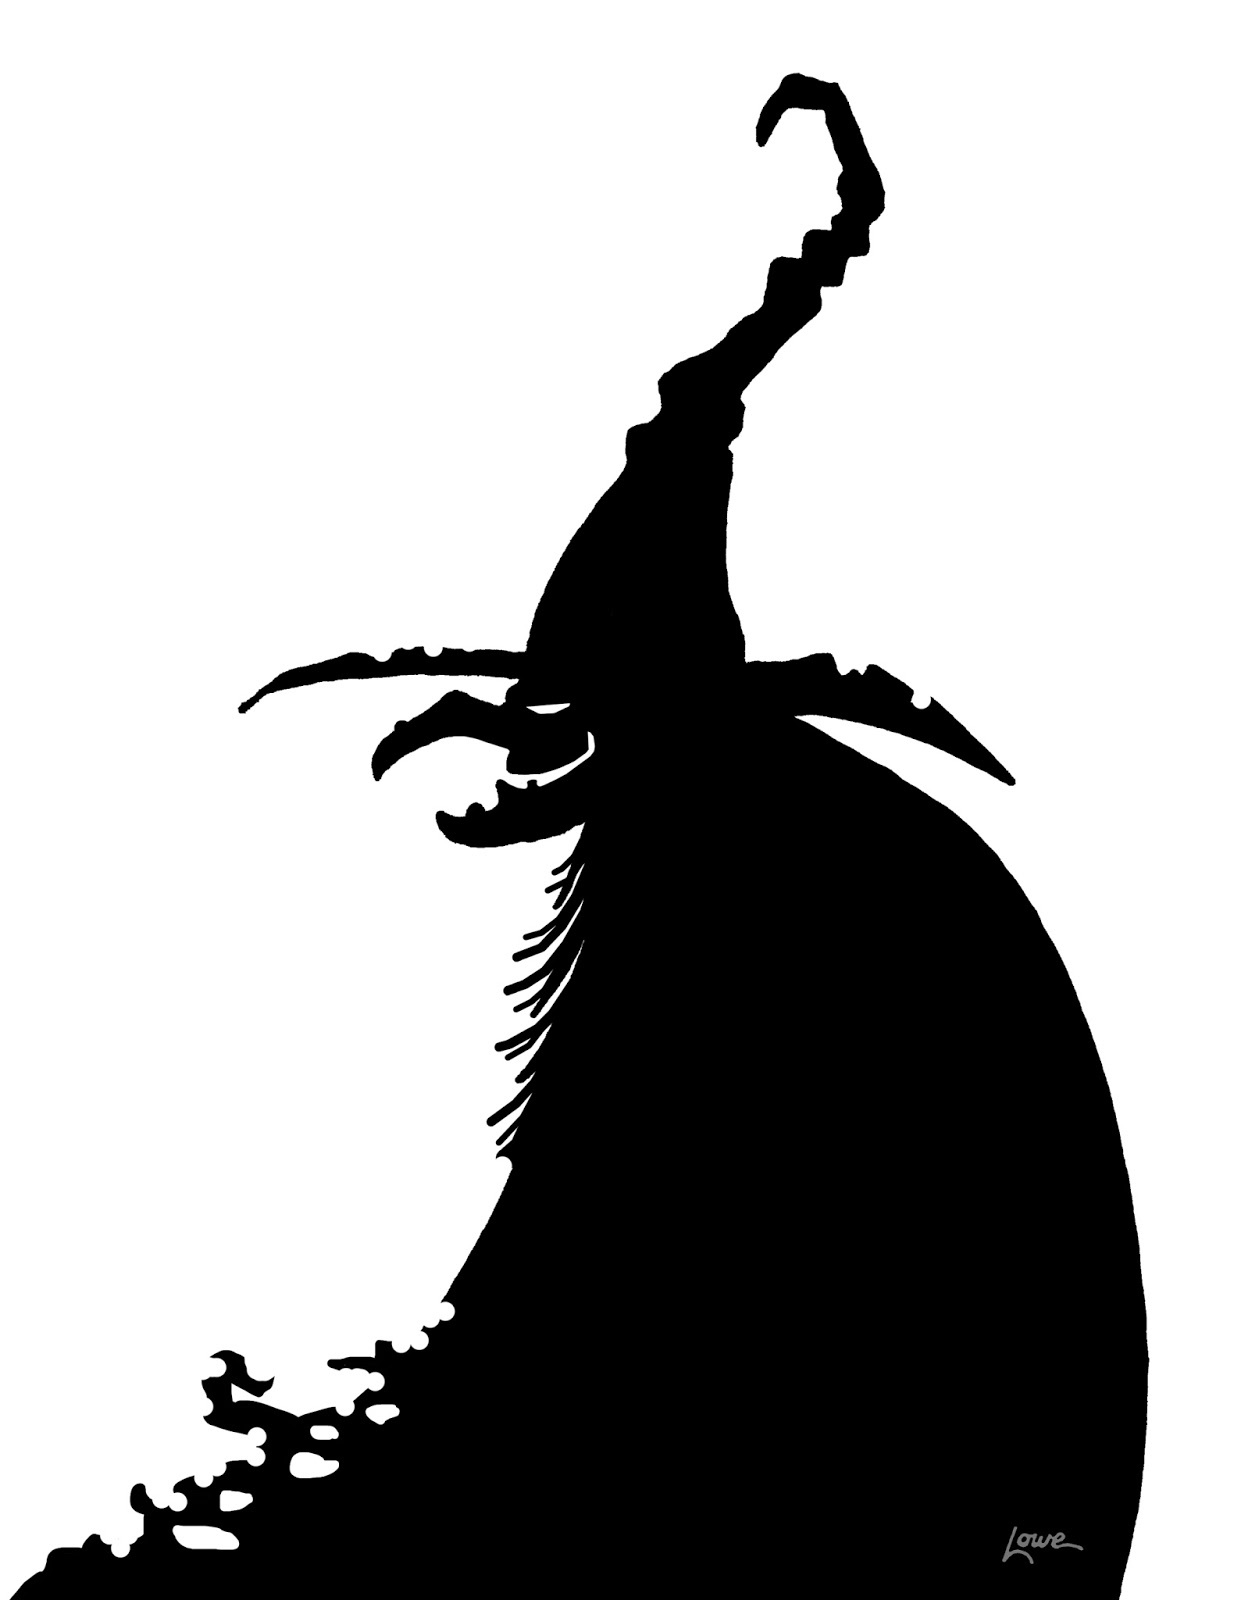 DAVE LOWE DESIGN the Blog: Witchcrafty Window Silhouette Printables